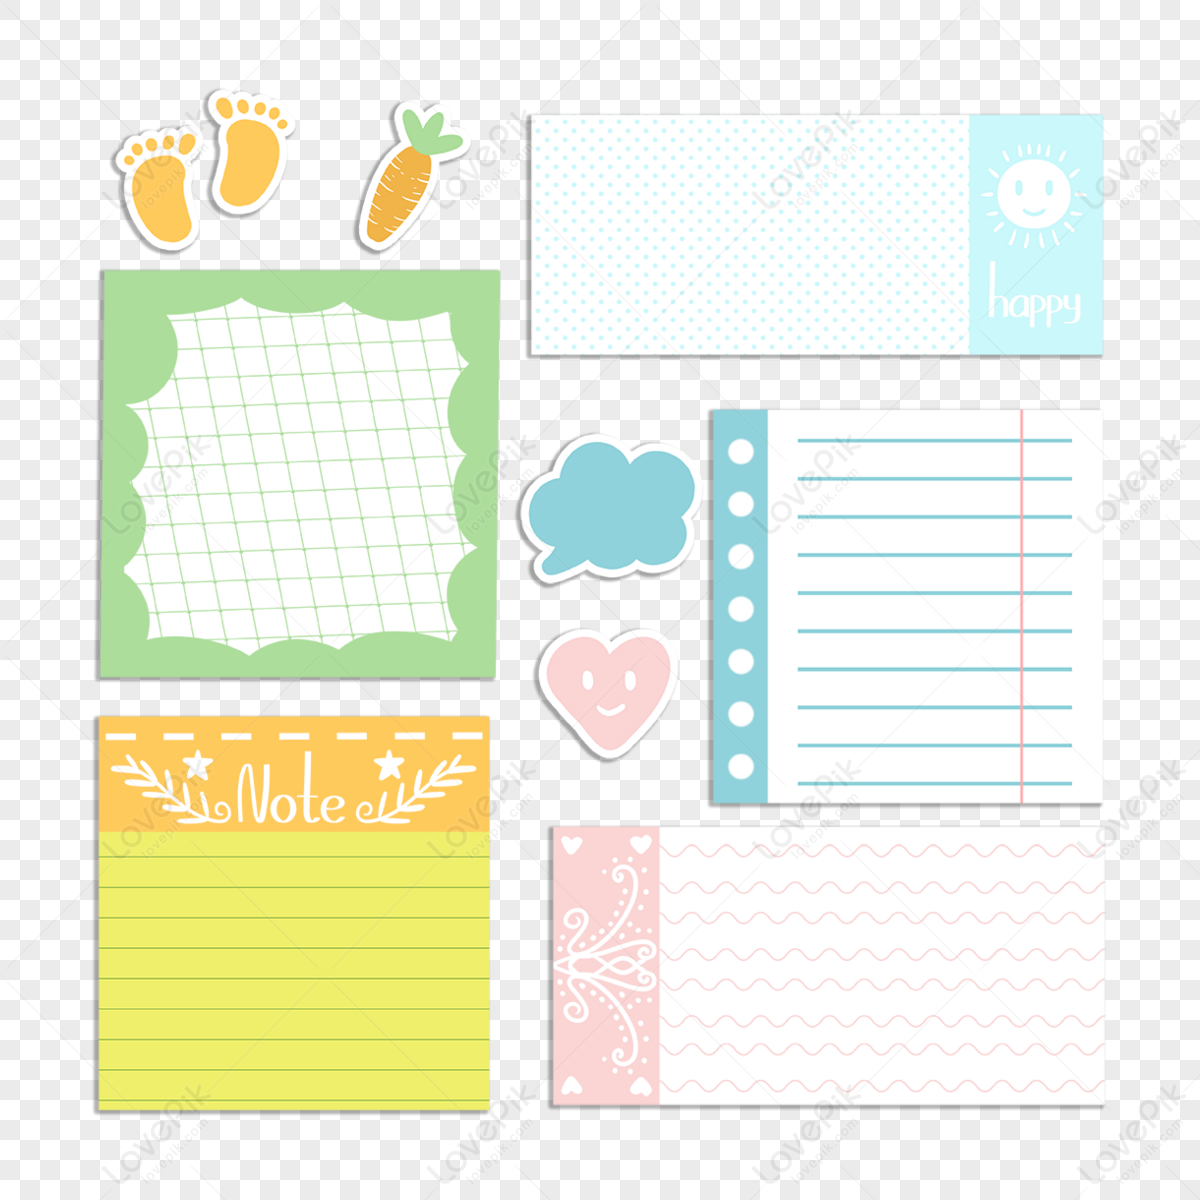 Cute color stationery notes,carrot,organic,date png transparent image